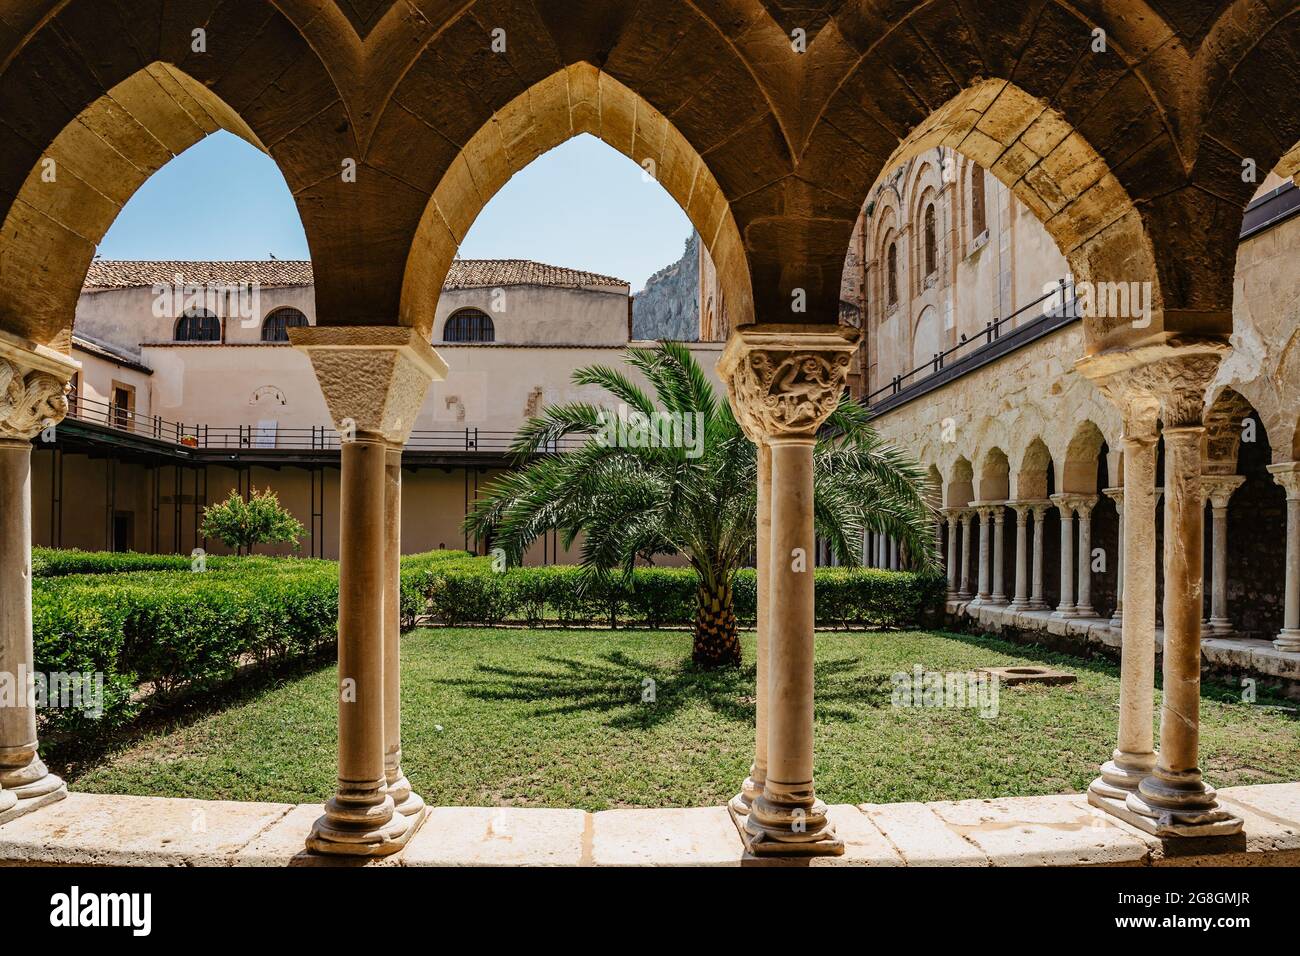 Cefalu,Sicily-June 6, 2021.Roman Catholic cathedral with cloister,arcade has pointed arches and columns.Monastery courtyard garden. Famous UNESCO Heri Stock Photo